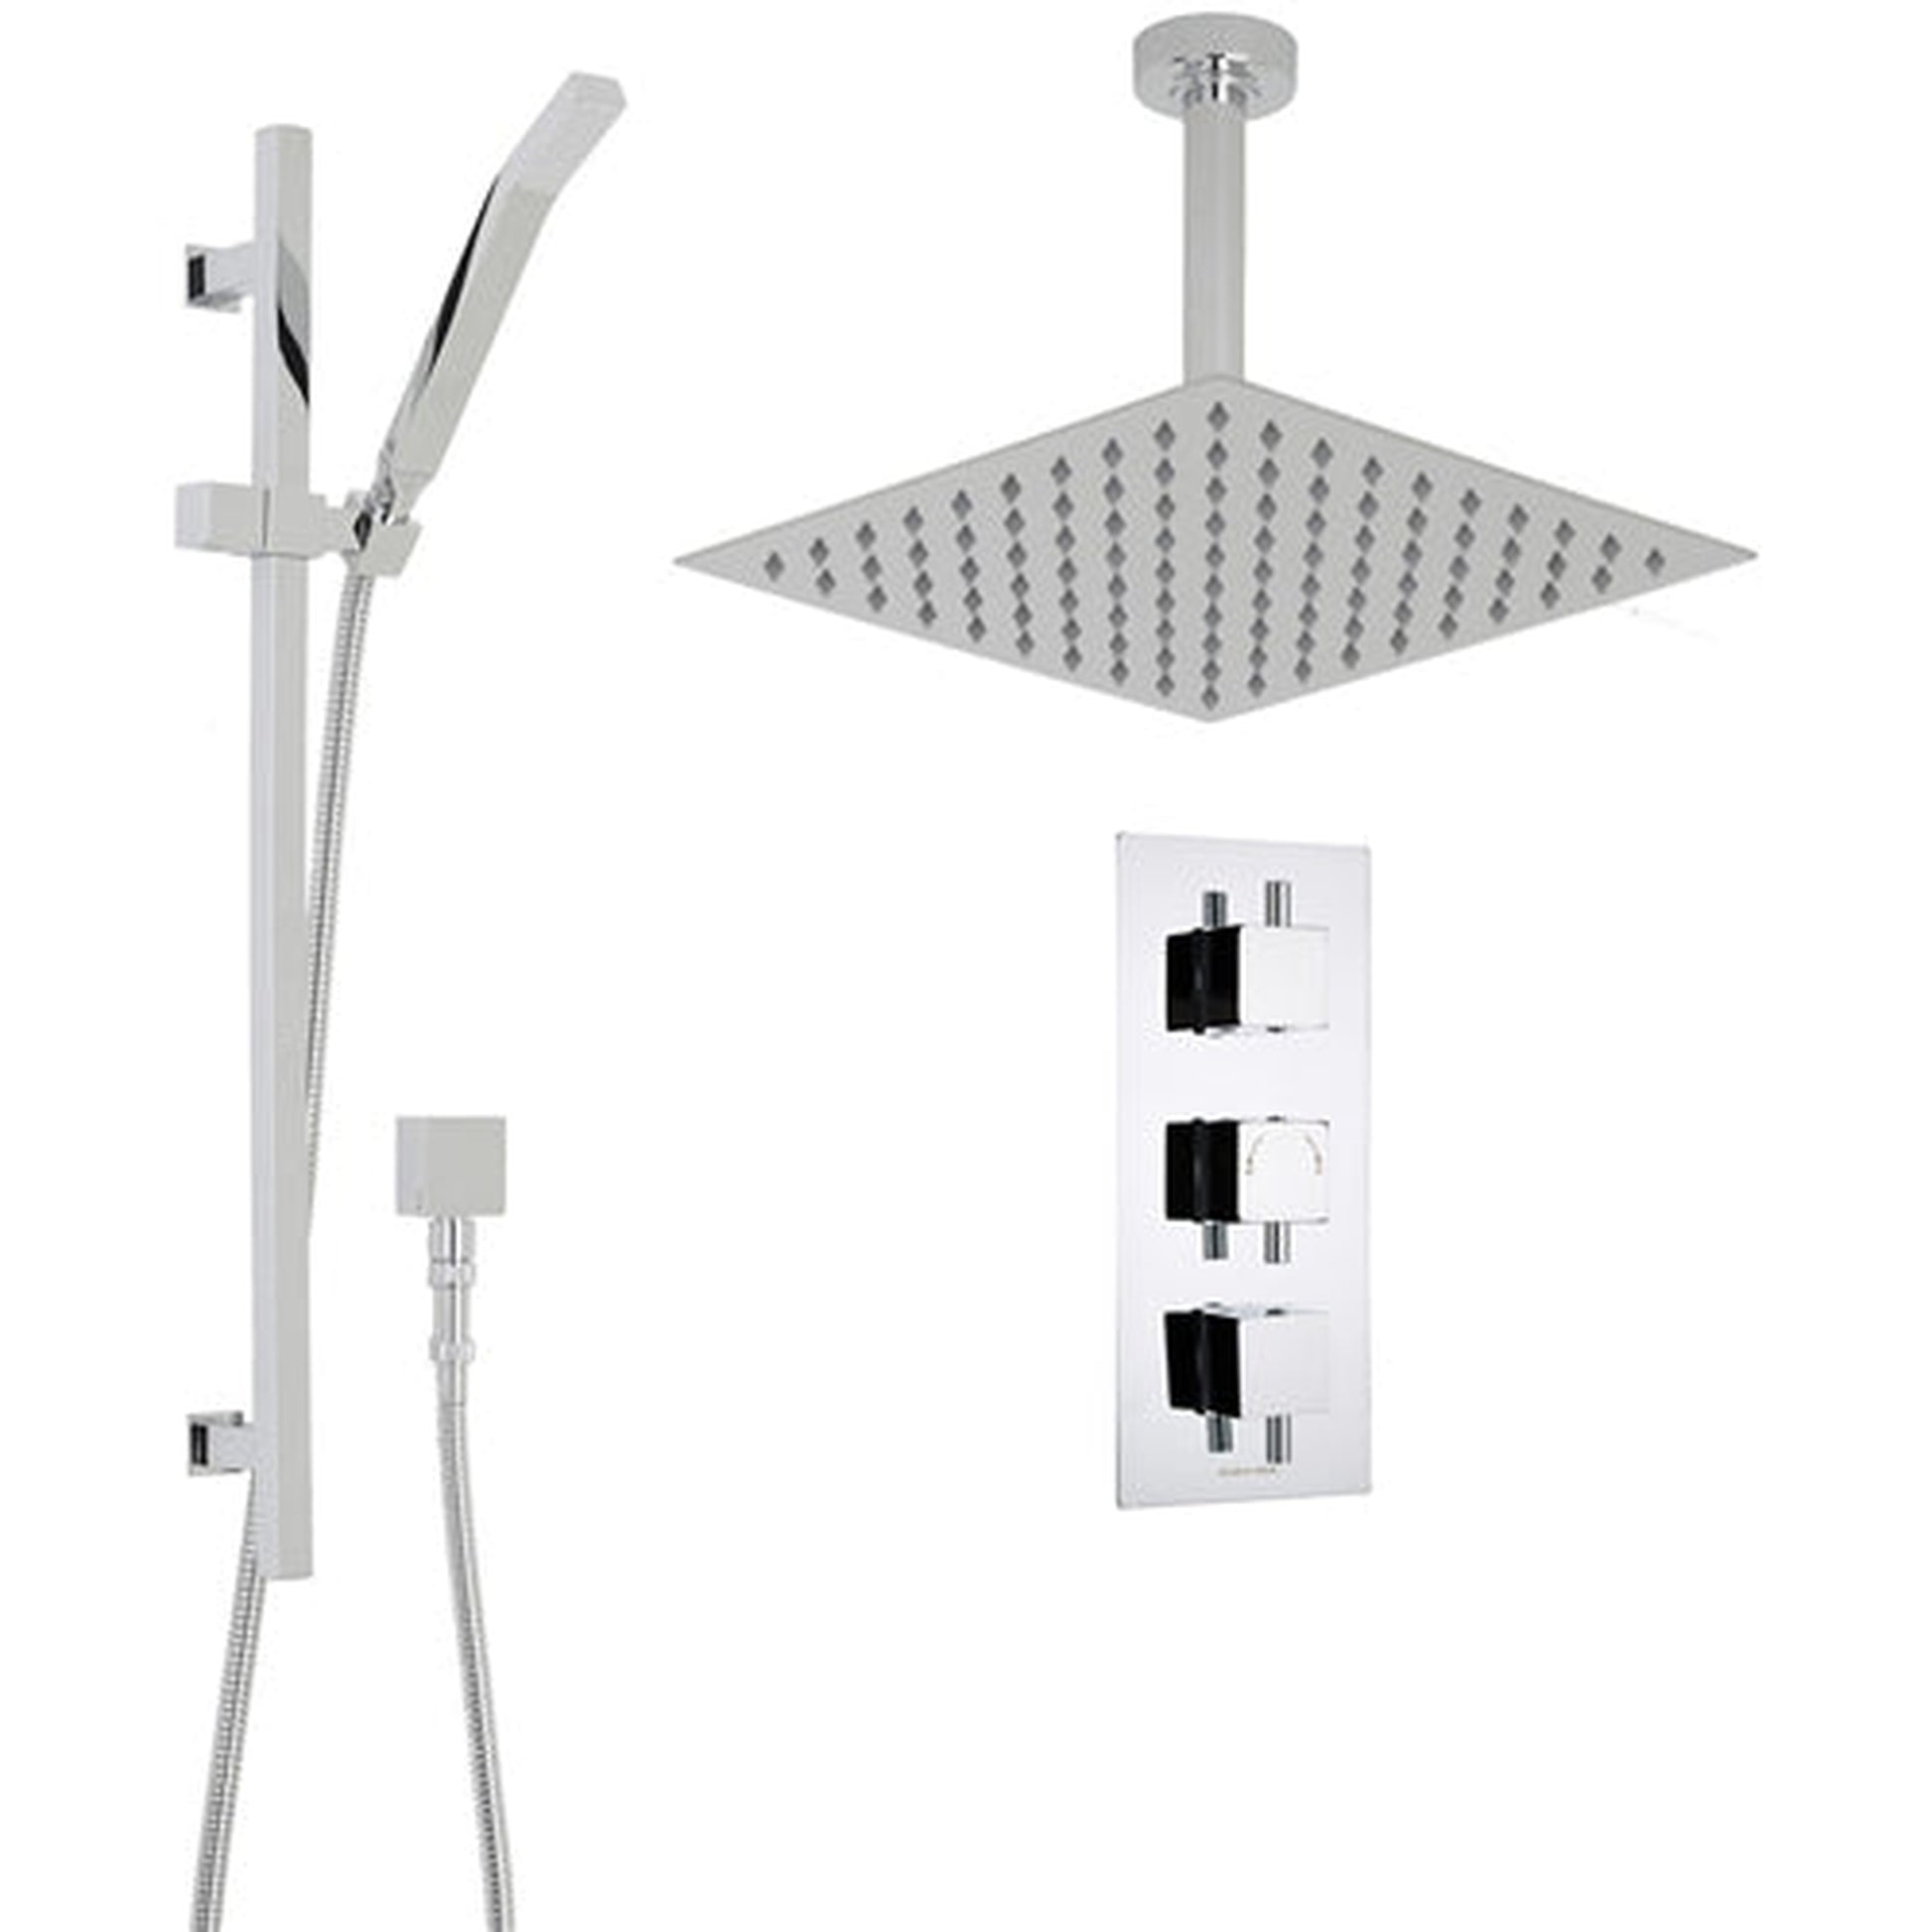 Fontana Liverpool 8" Chrome Round Ceiling Mounted Thermostatic Rainfall Shower System With Hand Shower and With Water Powered LED Lights